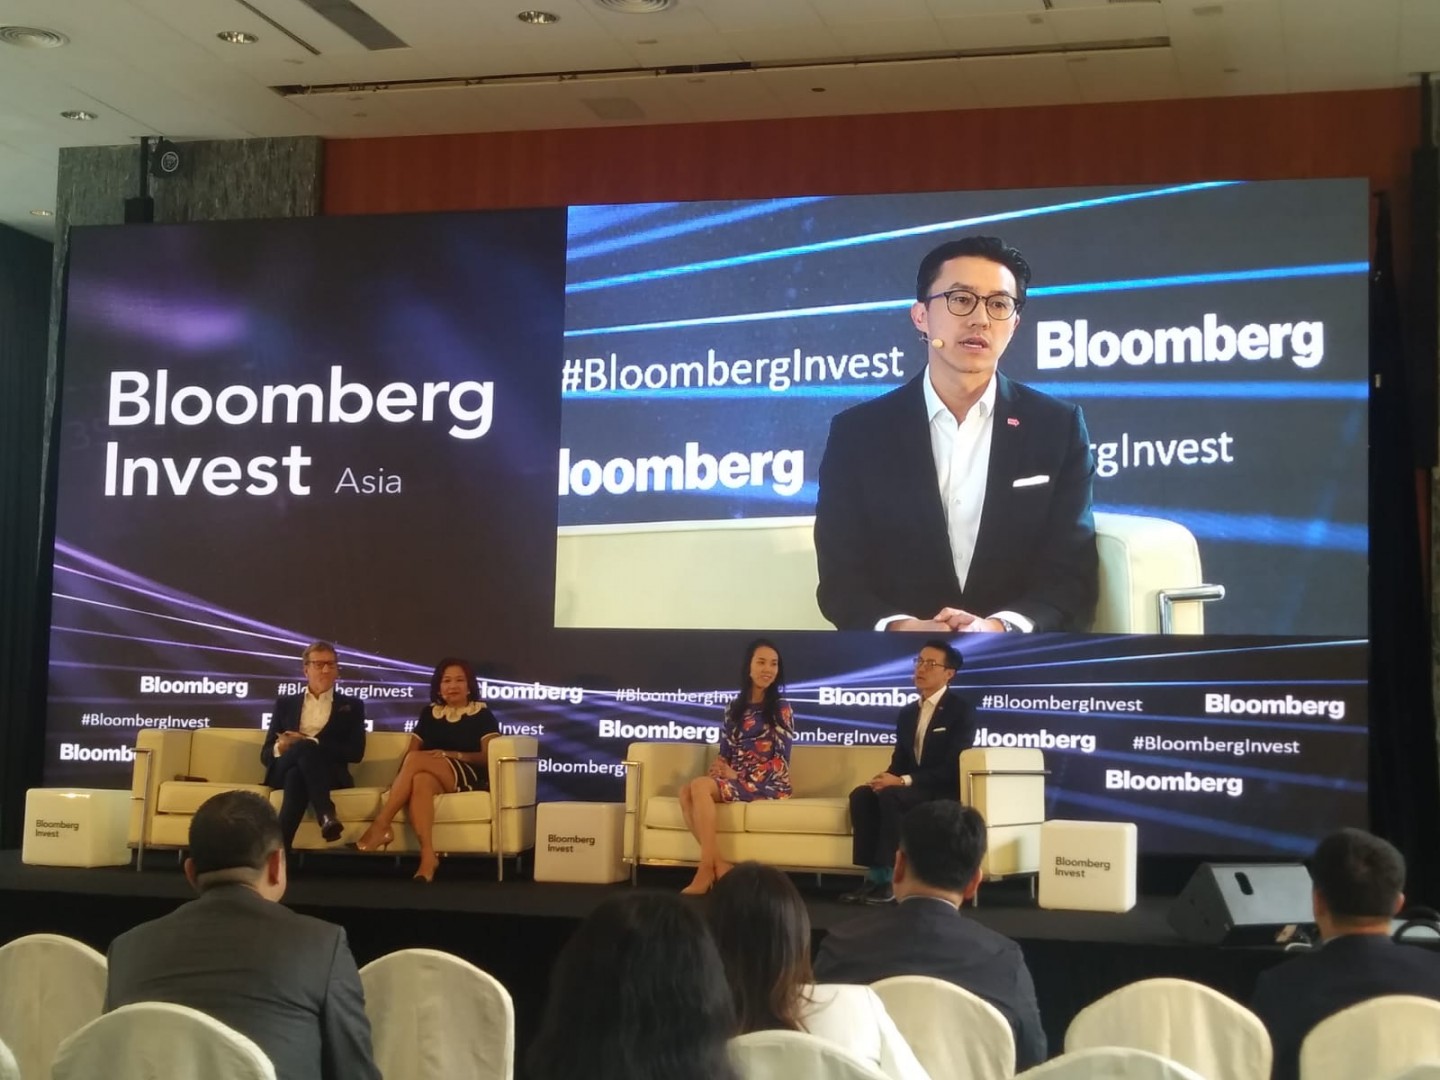 Bloomberg Invest Asia